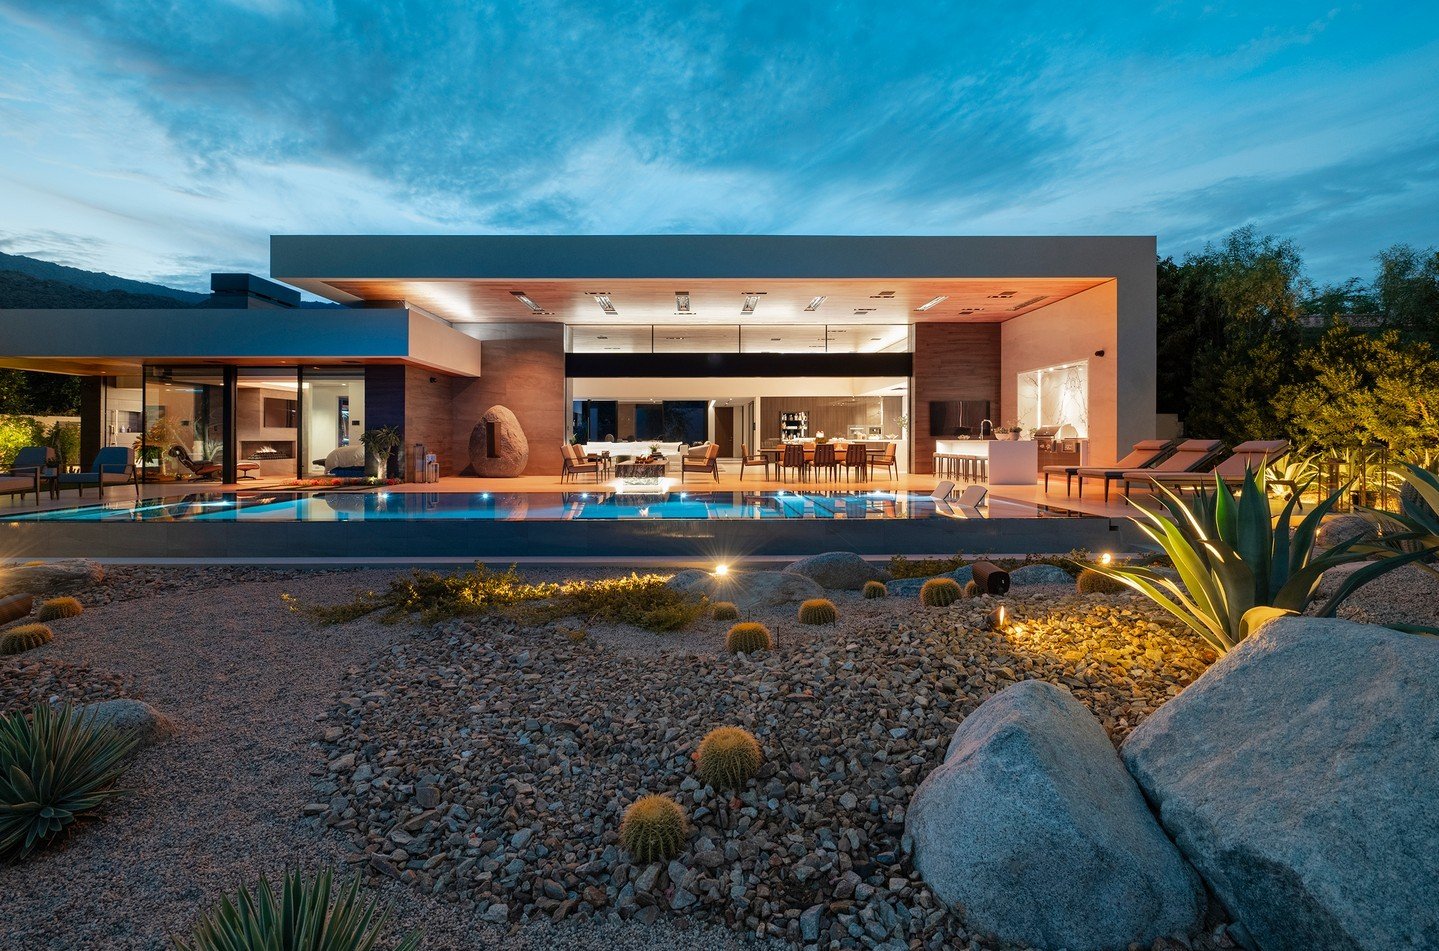 The modernist design of our Bighorn House opens up interior spaces to a backyard swimming pool, cactus garden, and views. Landscape architecture by @attingerlandscapearchitecture, pool by @azurepoolsandspas, and photo by @maccollum